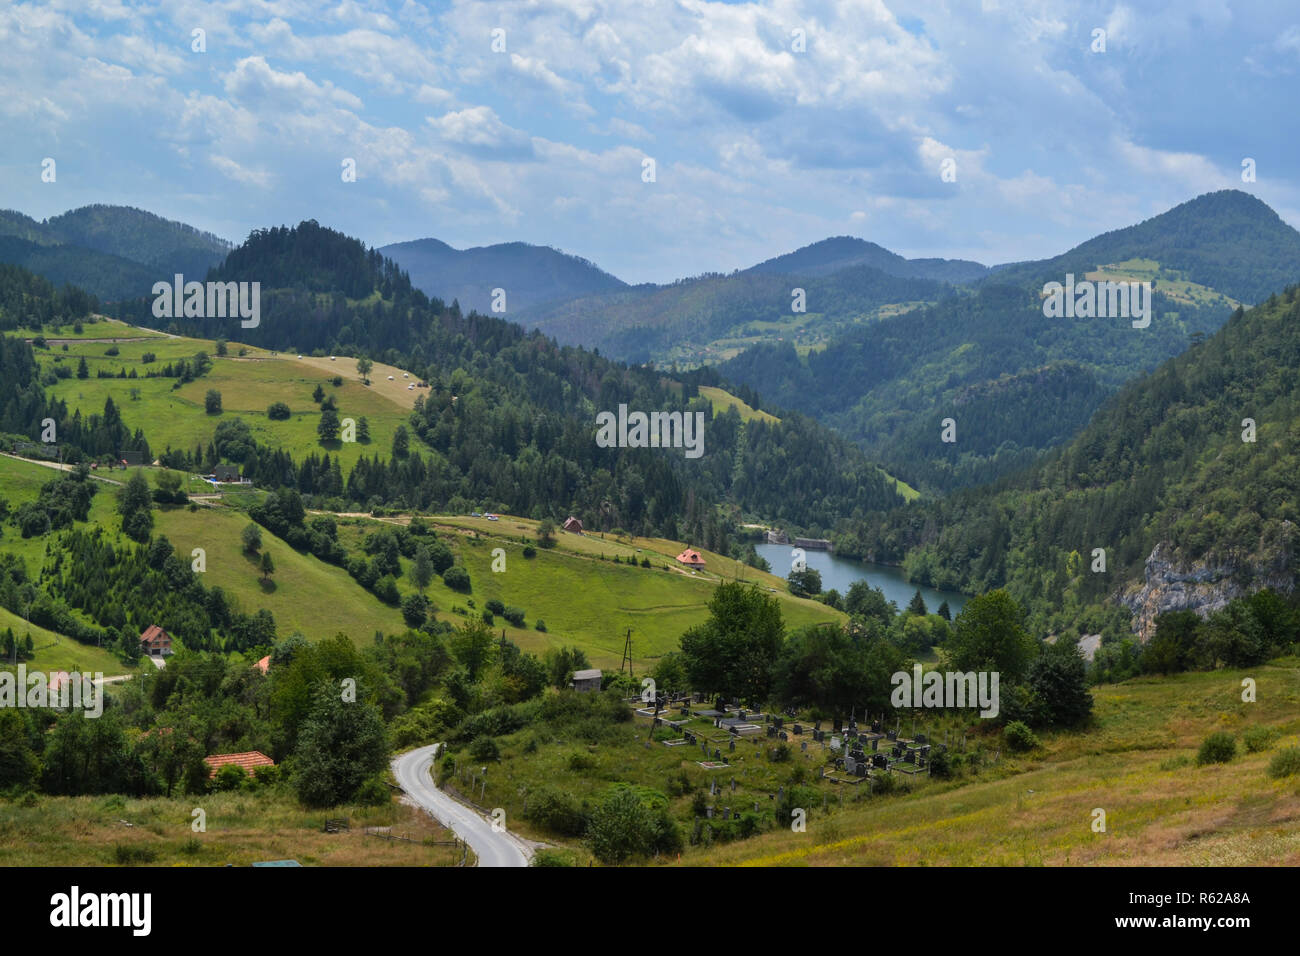 Landscape somewhere in Serbia Stock Photo